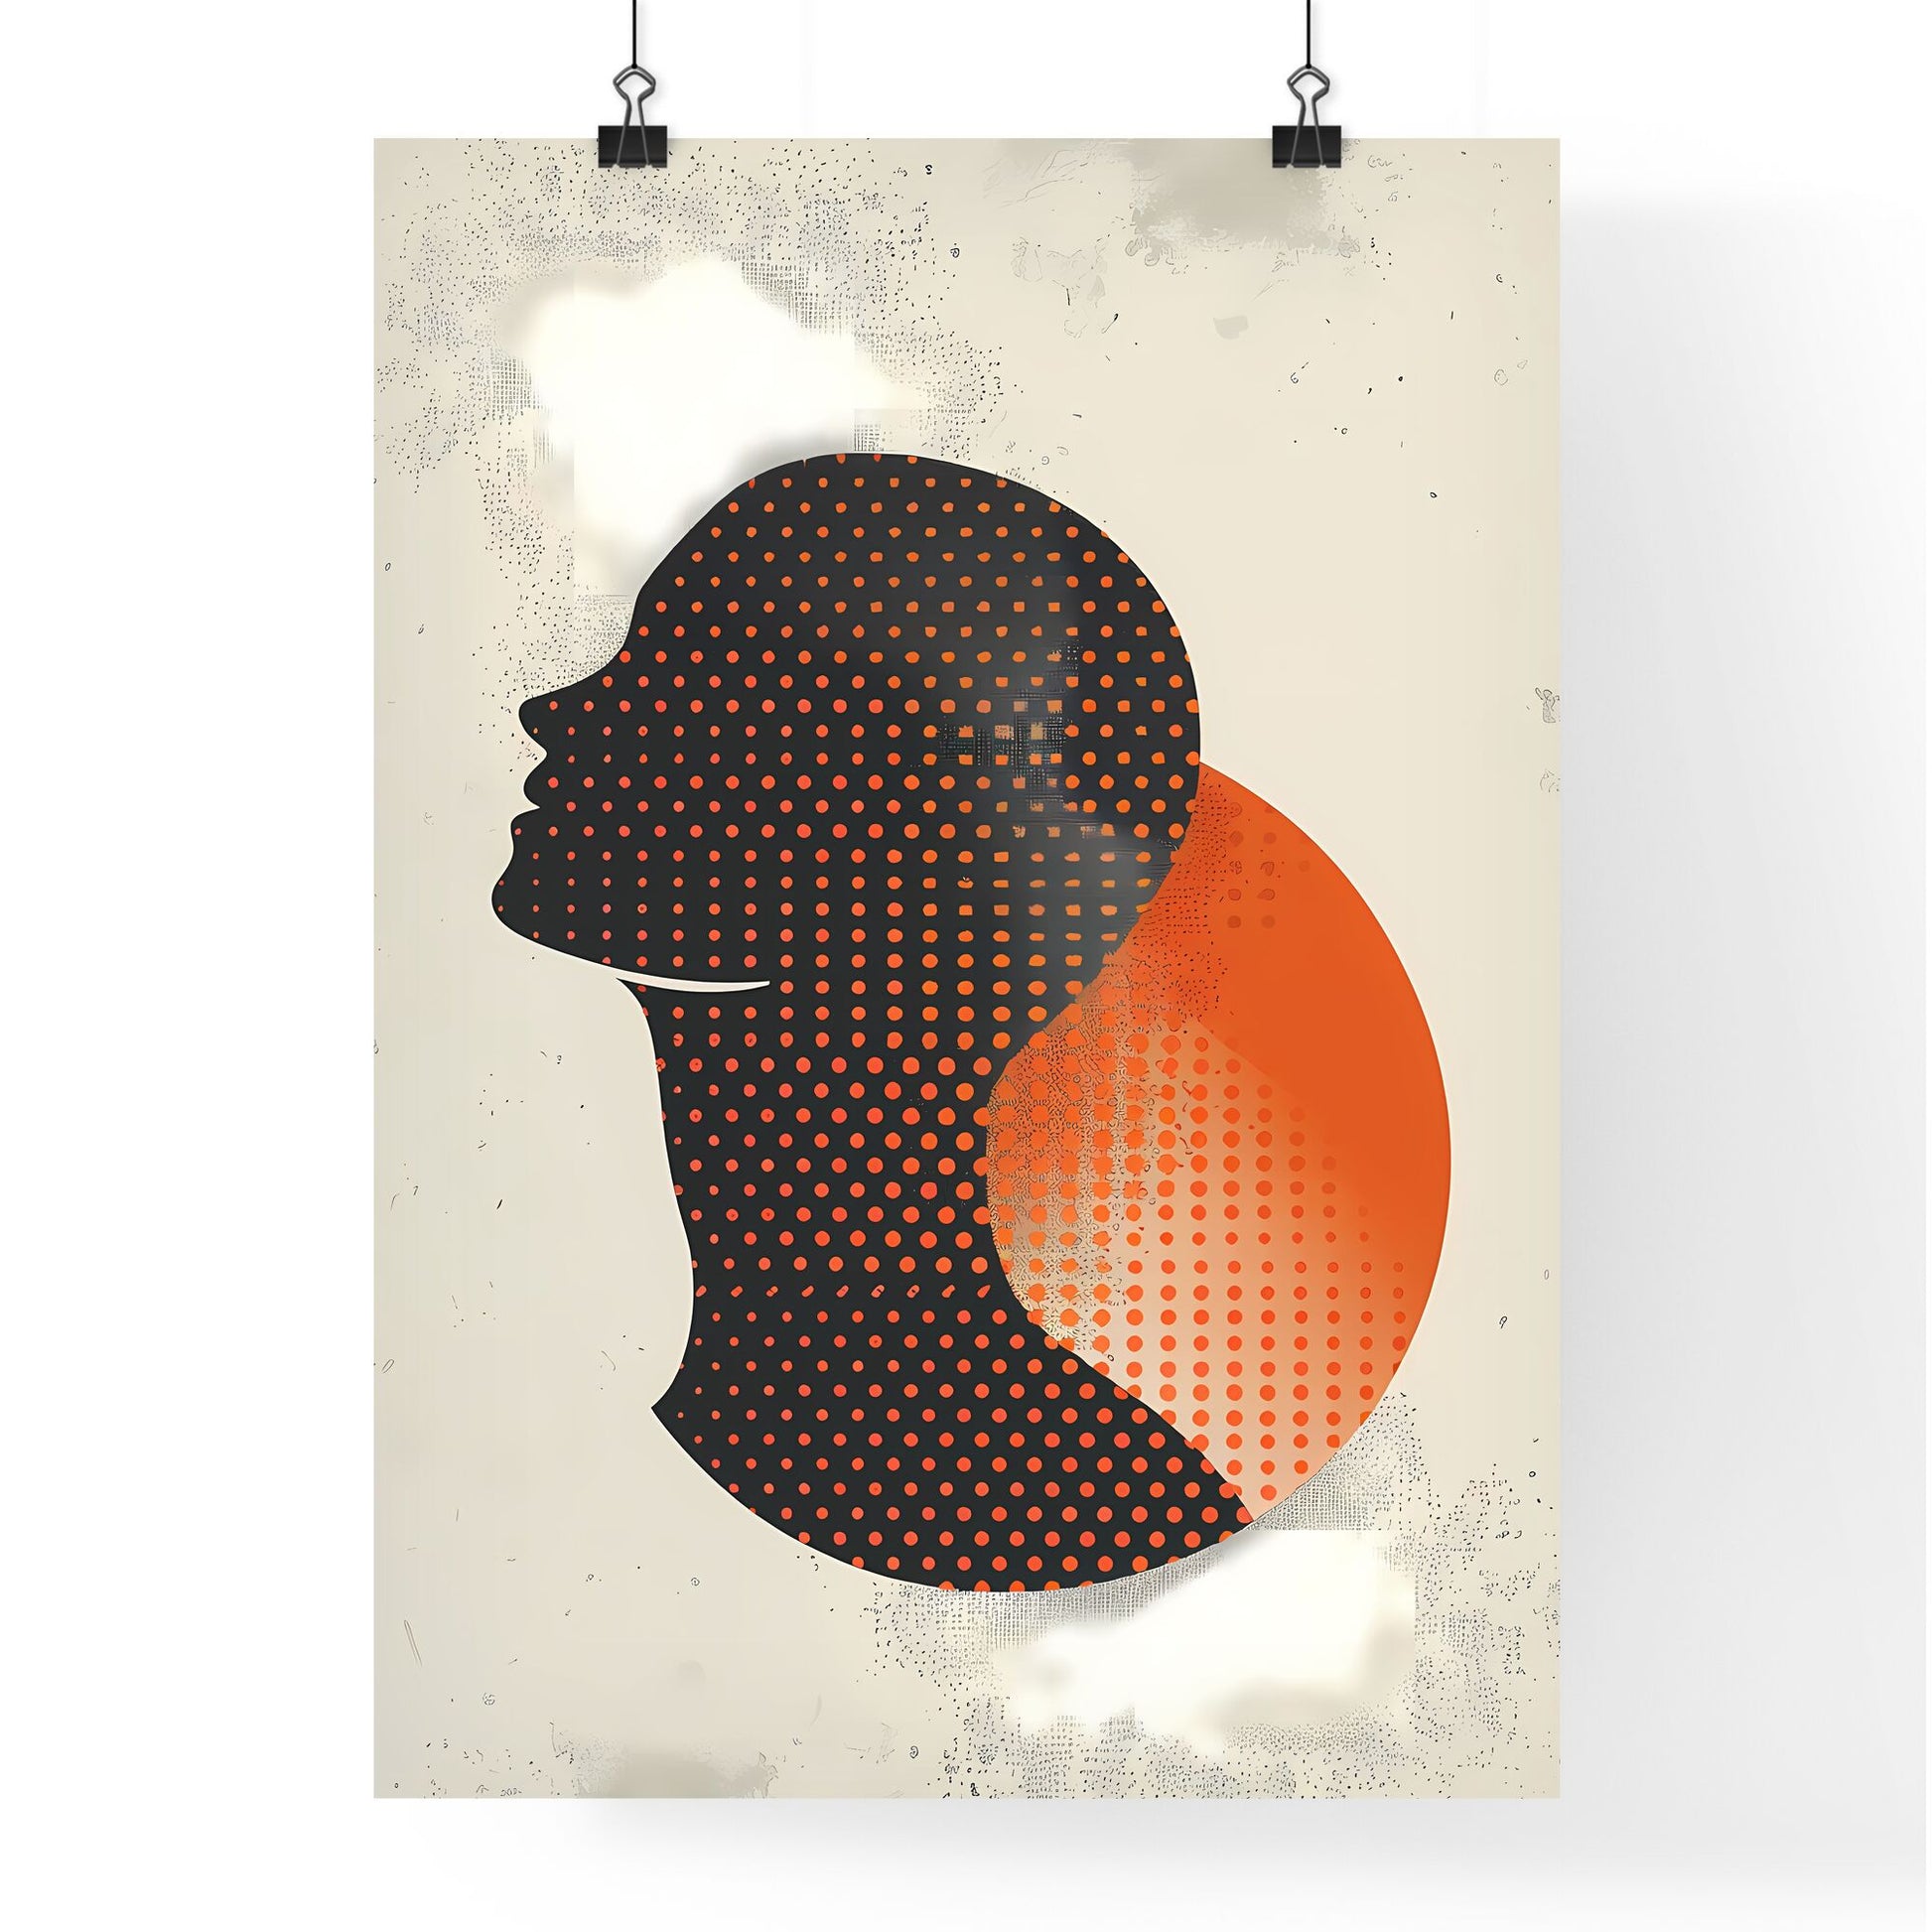 Abstract Dotted Black Orange Painting Minimalist Pixel Art Digital Art Contemporary Creative Concept Technology Innovation Default Title